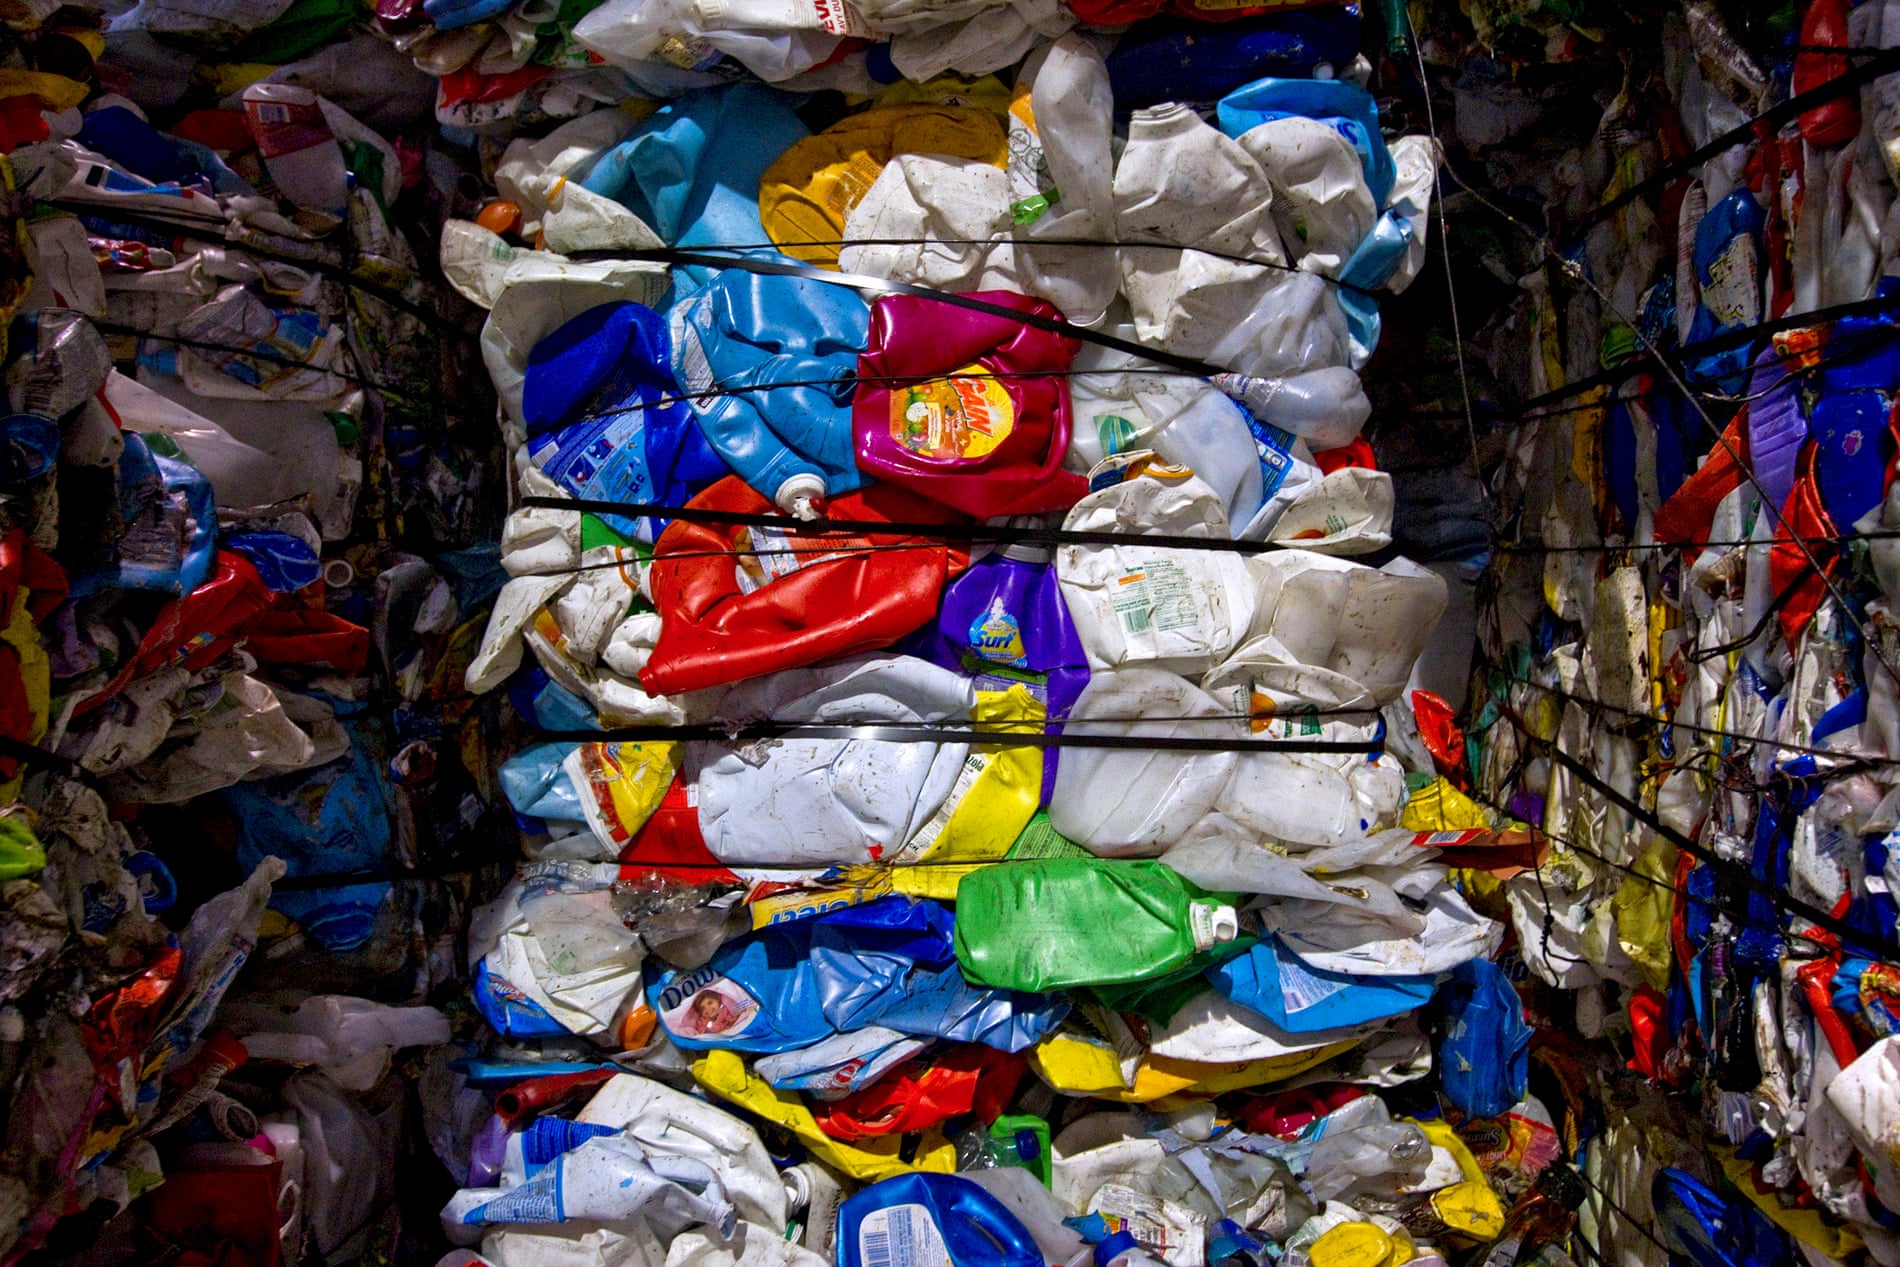 Plastic bottles bundled in a recycling facility. Bales such as these travel around the world on shipping containers.